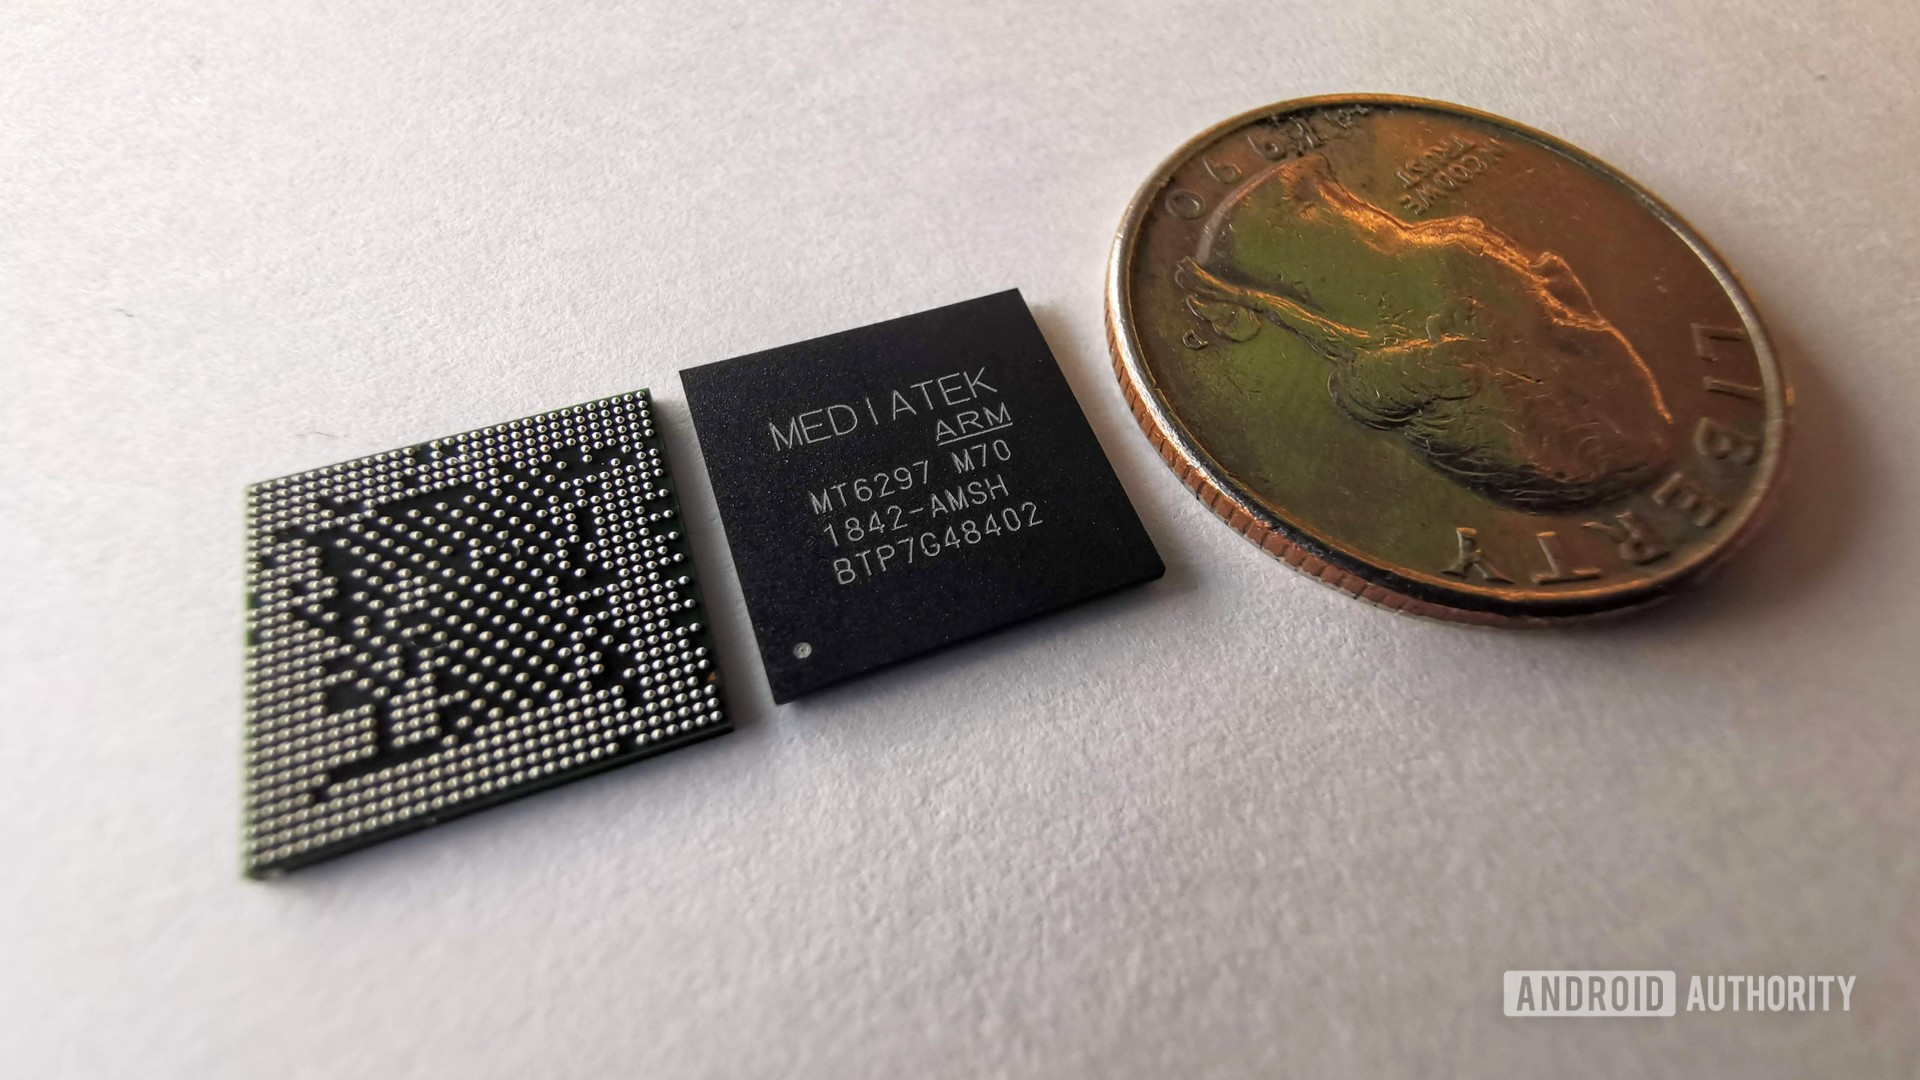 Intel has teamed up with MediaTek to use a 5G modem based on the Helio M70.